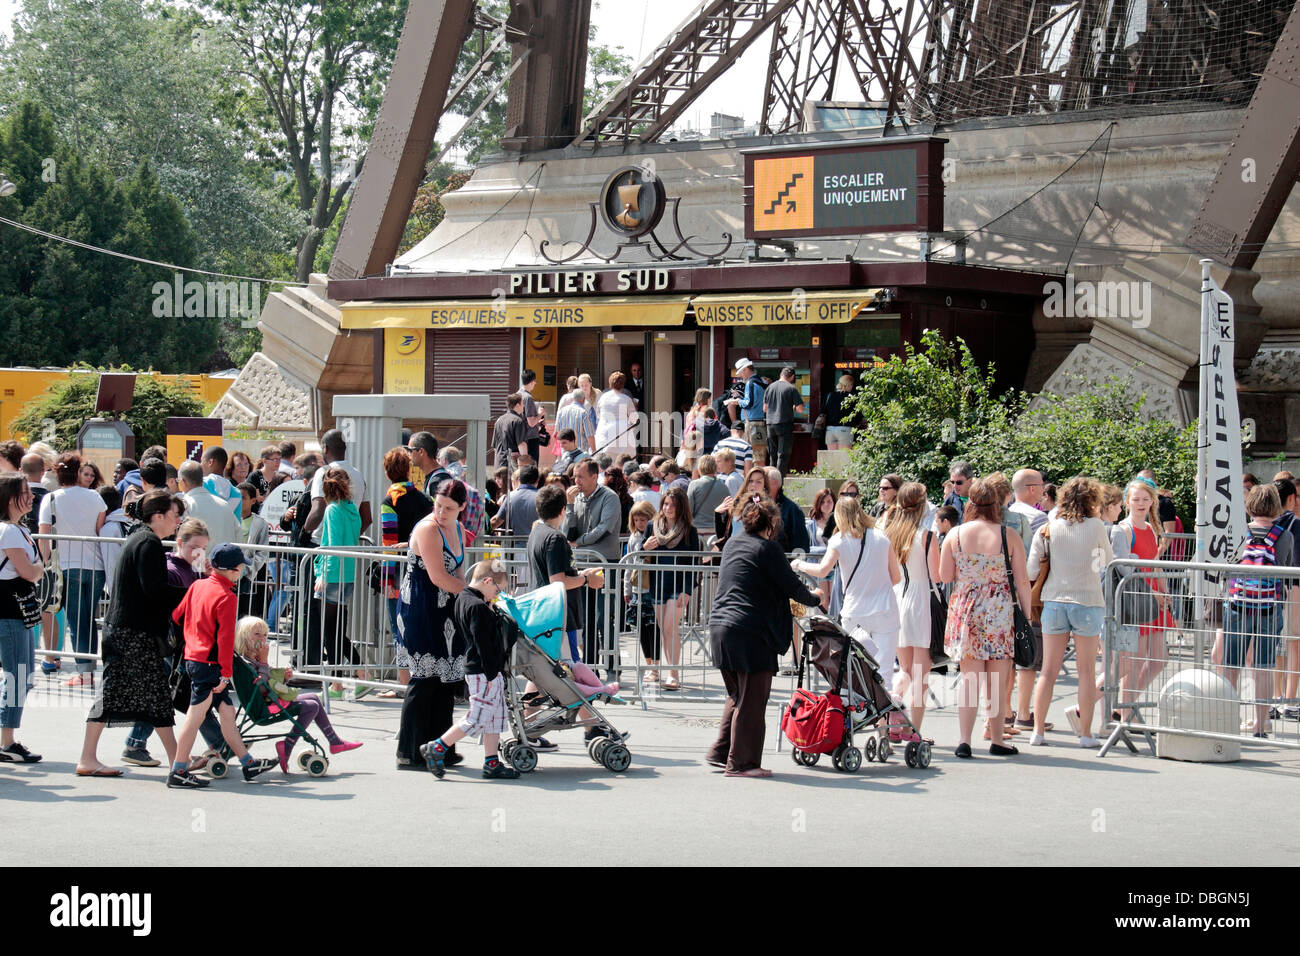 Queues of people waiting to climb the stairs in the eiffel tower, Paris, France. Stock Photo